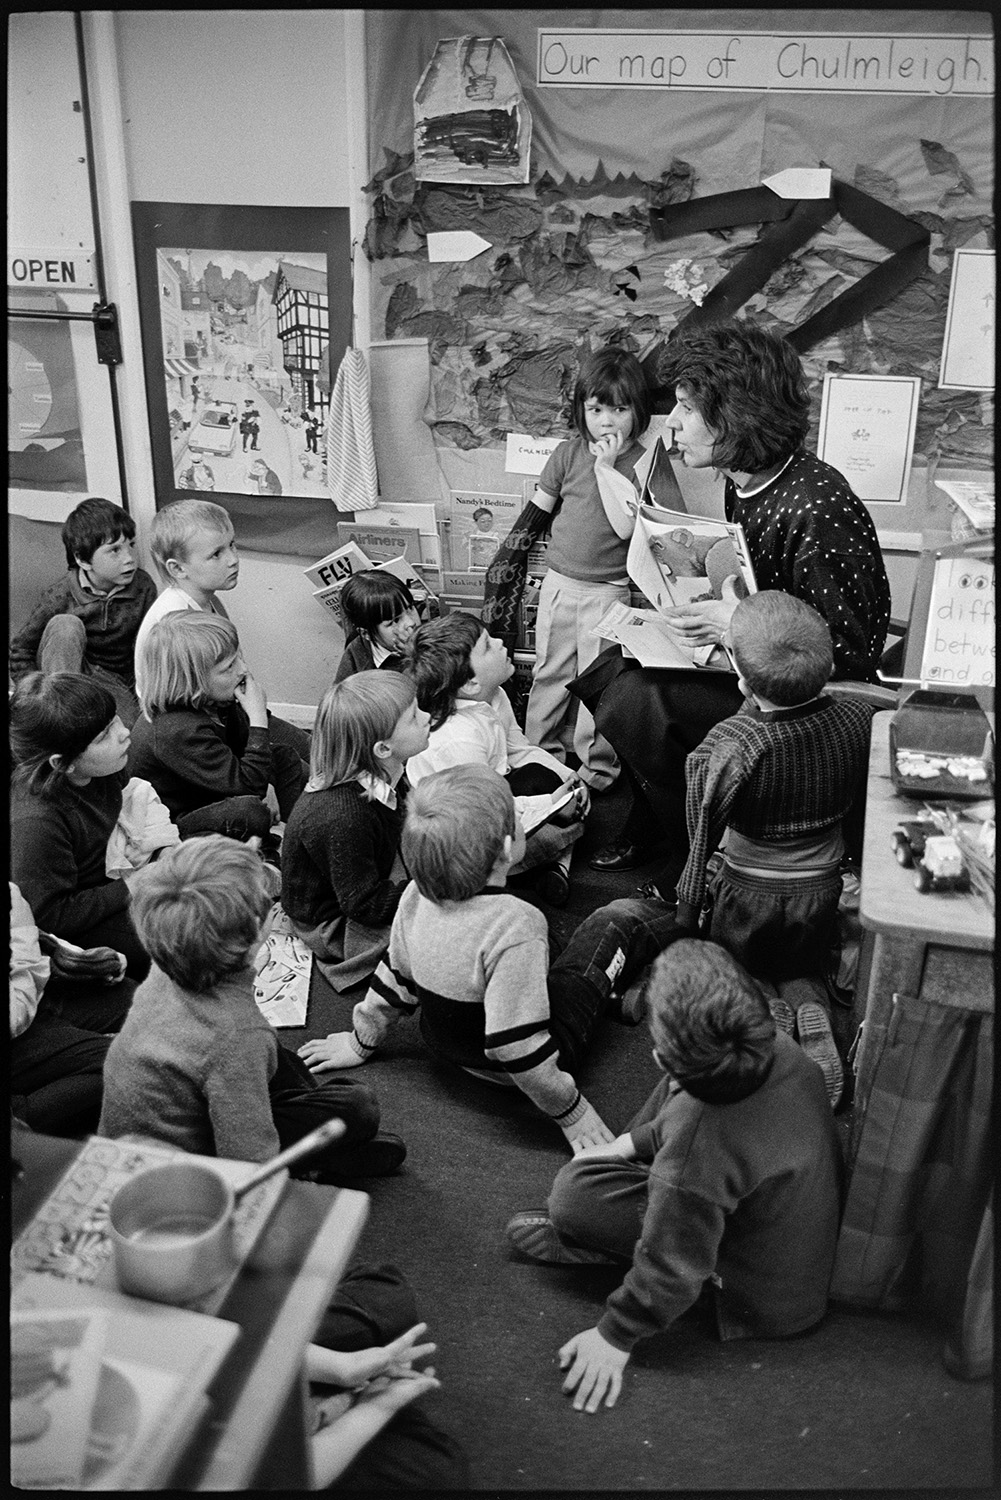 Children in primary school prefab classroom, before move to new school. 
[Mrs Bassett, a supply teacher, reading a story to children in a porta cabin classroom at Chulmleigh Primary School. Children's work is displayed on the classroom wall.]